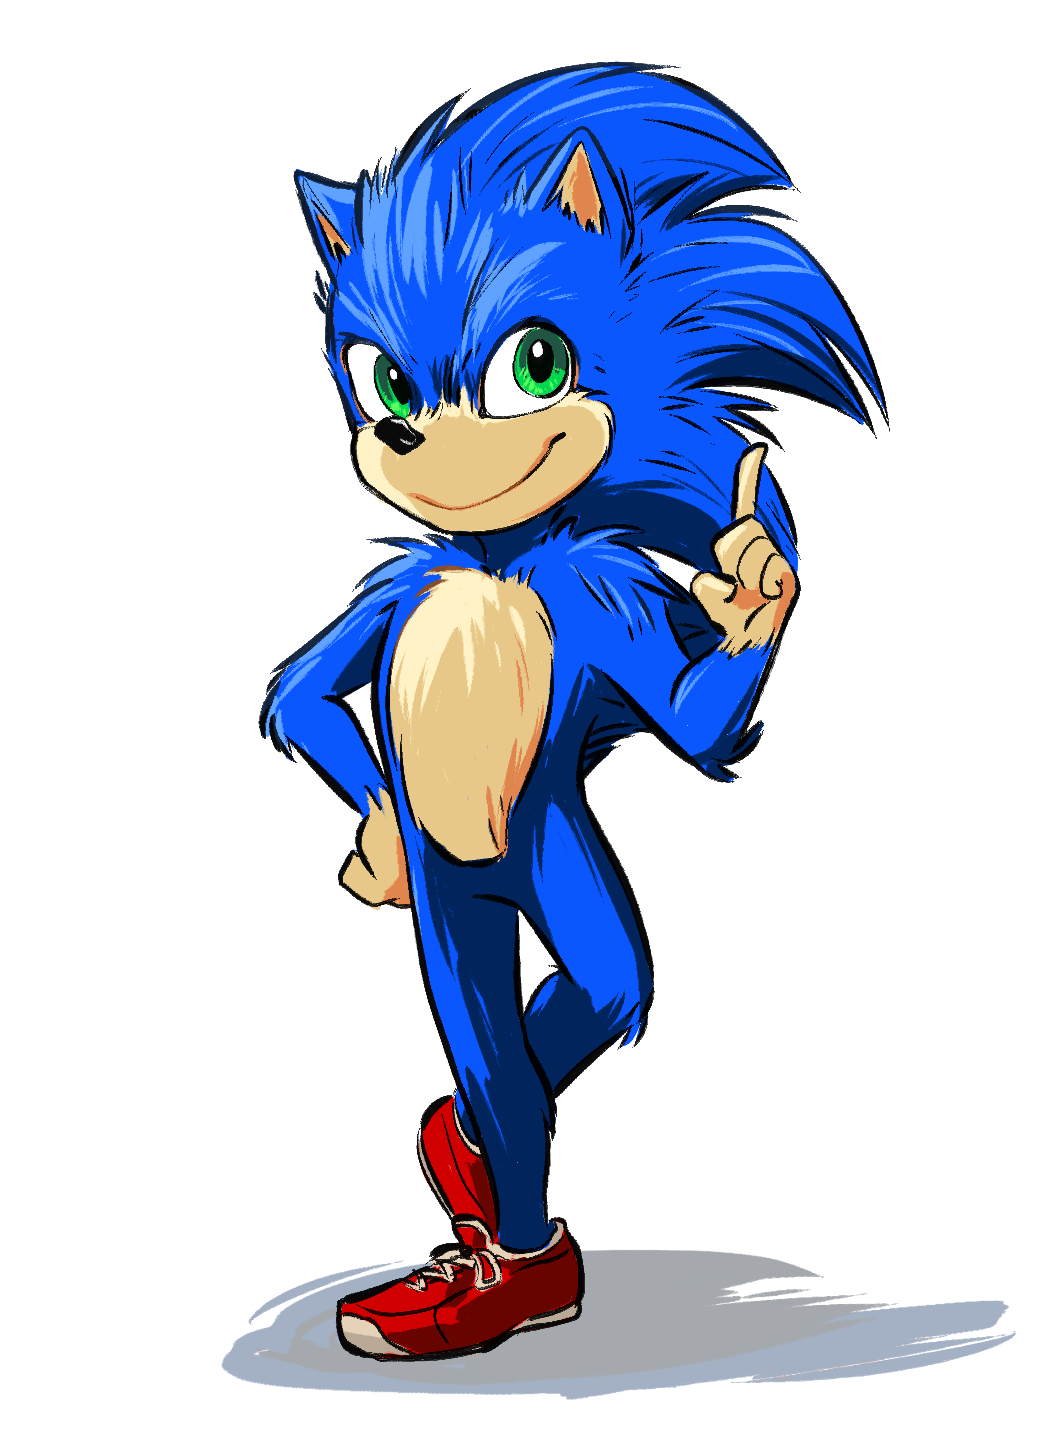 Here's more fan art of what sonic could look like in the movie : SonicTheHedgehog